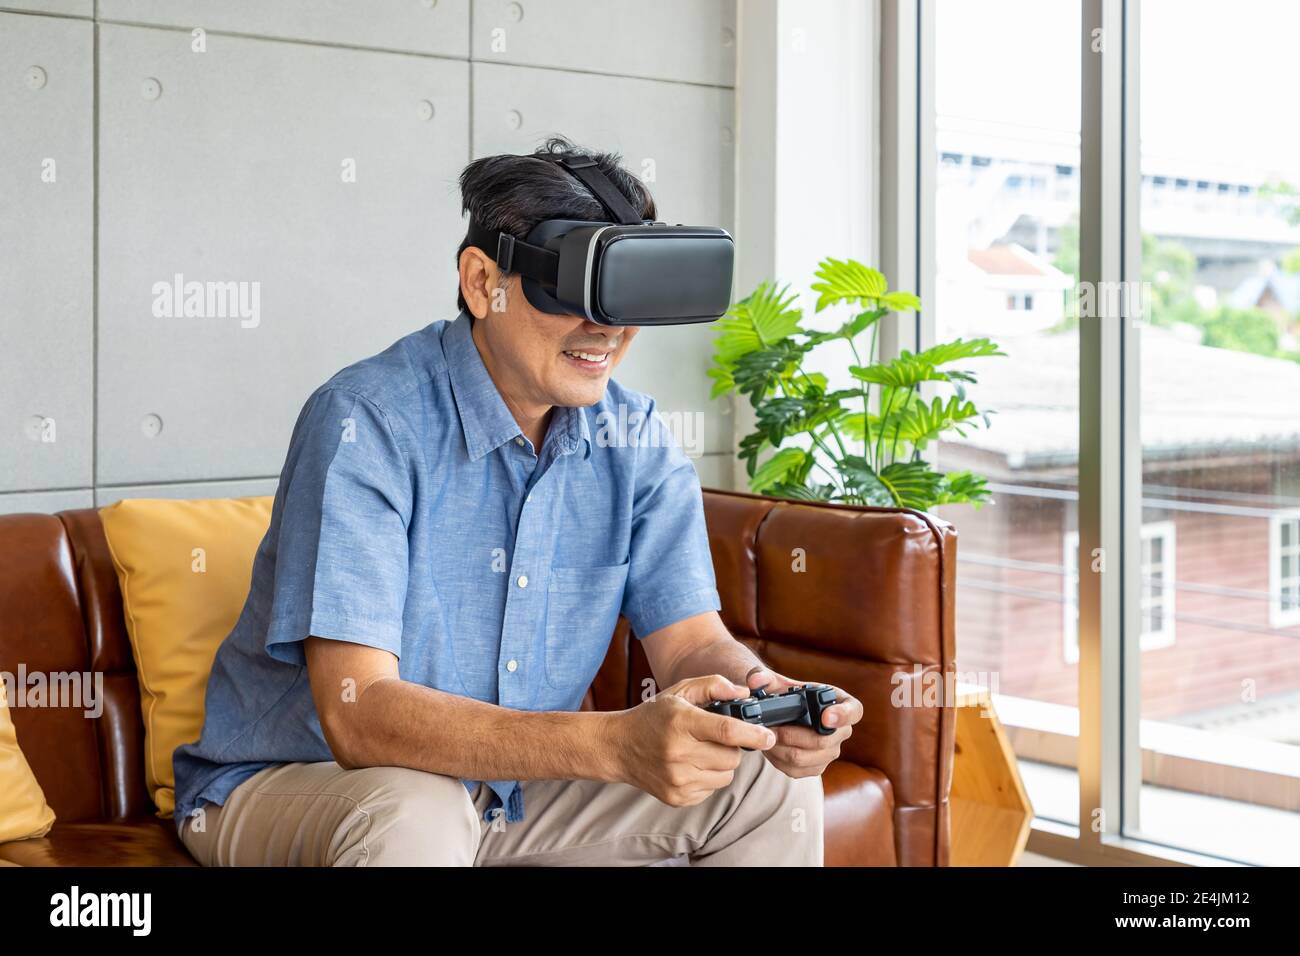 Senior retirement Asian man wearing virtual reality glasses sitting on couch sofa holding joystick and playing game Stock Photo